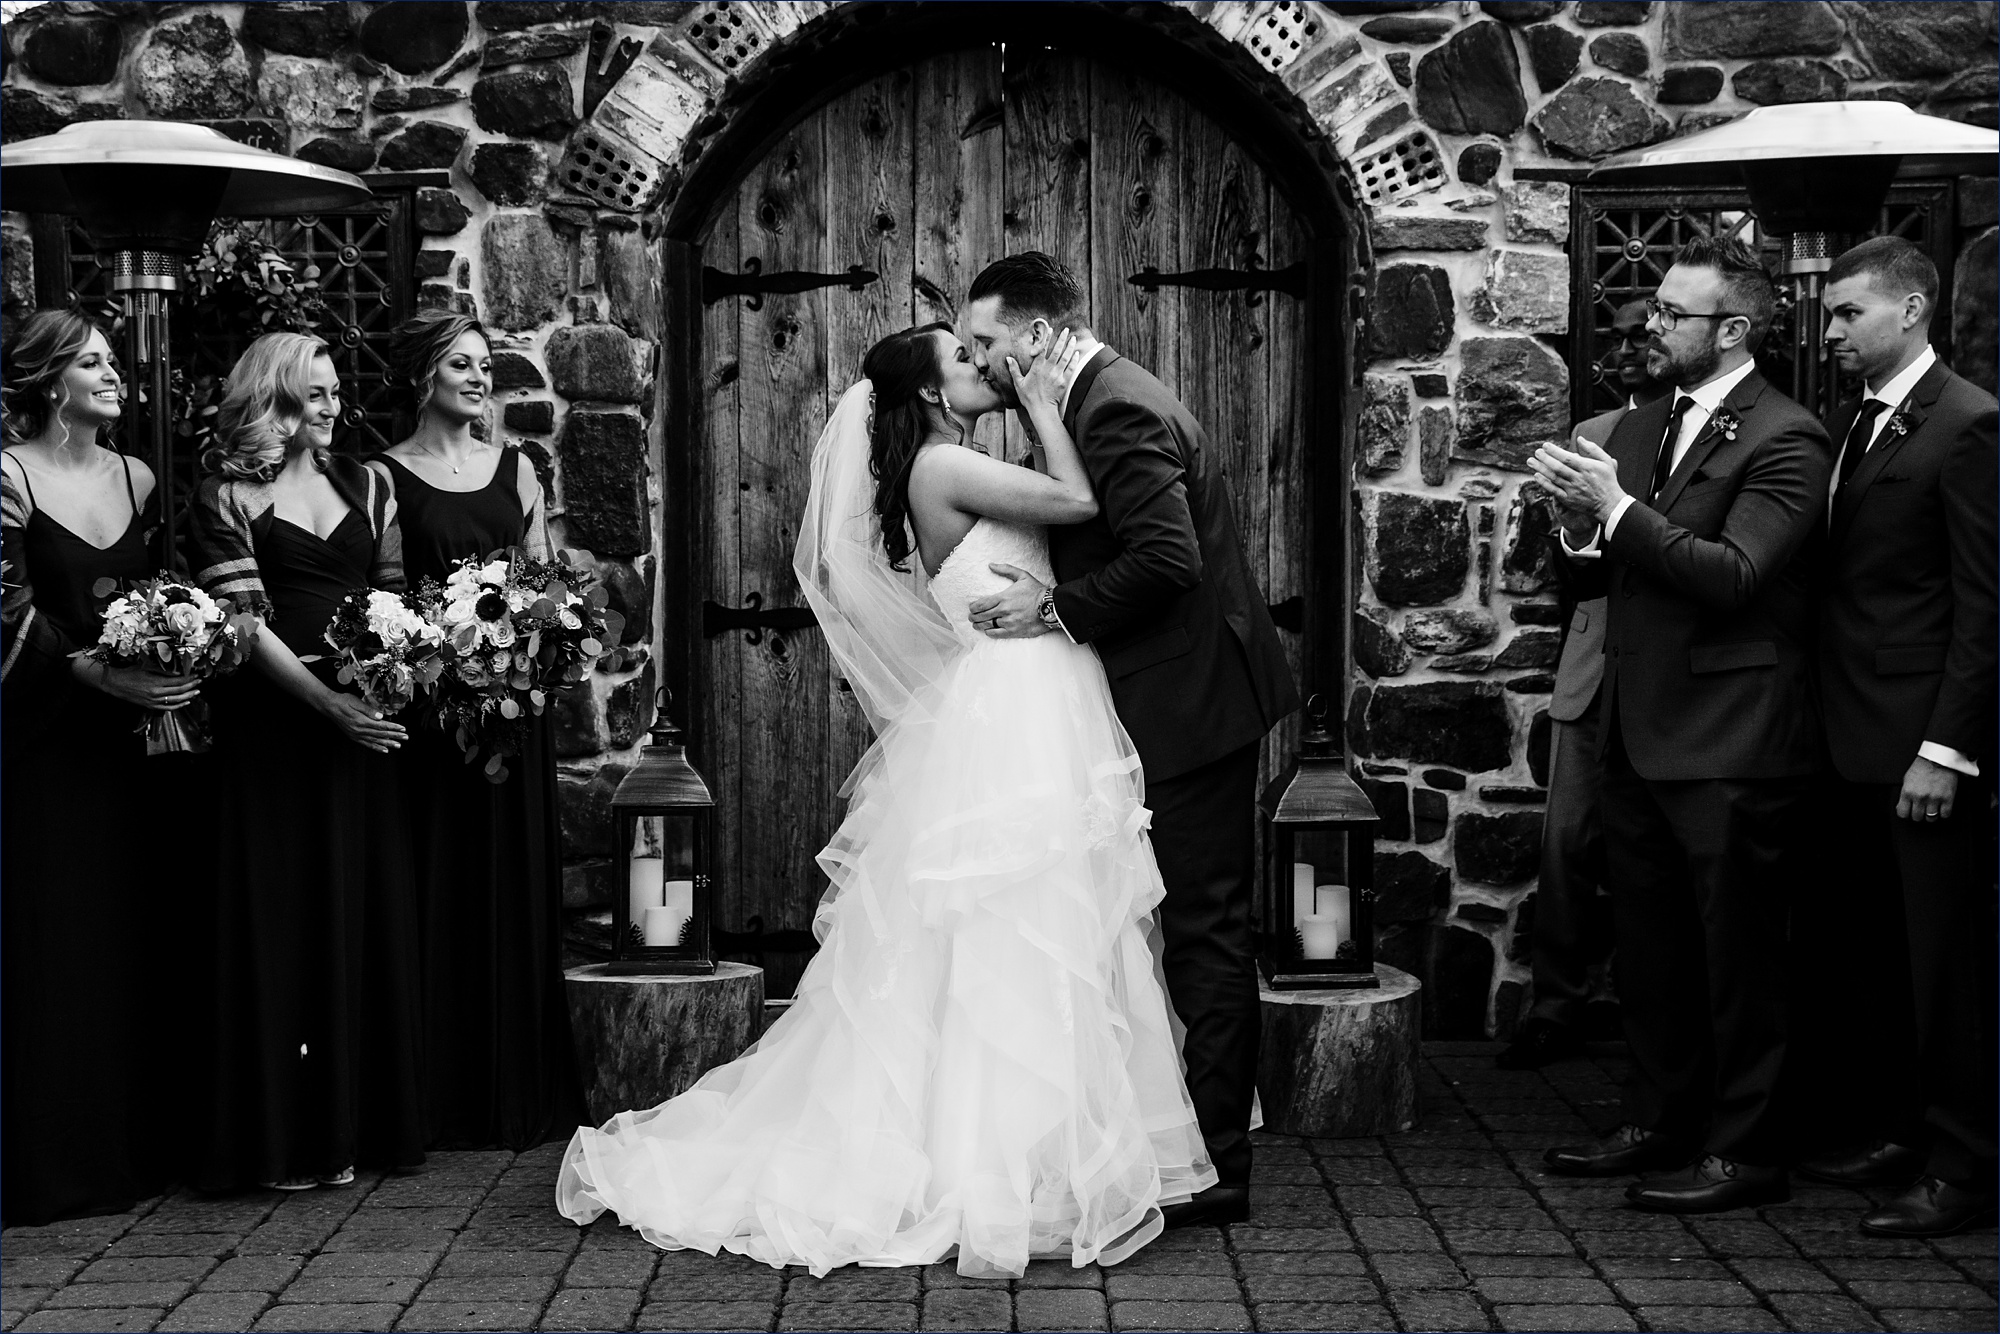 The first kiss on the outdoor wedding in February